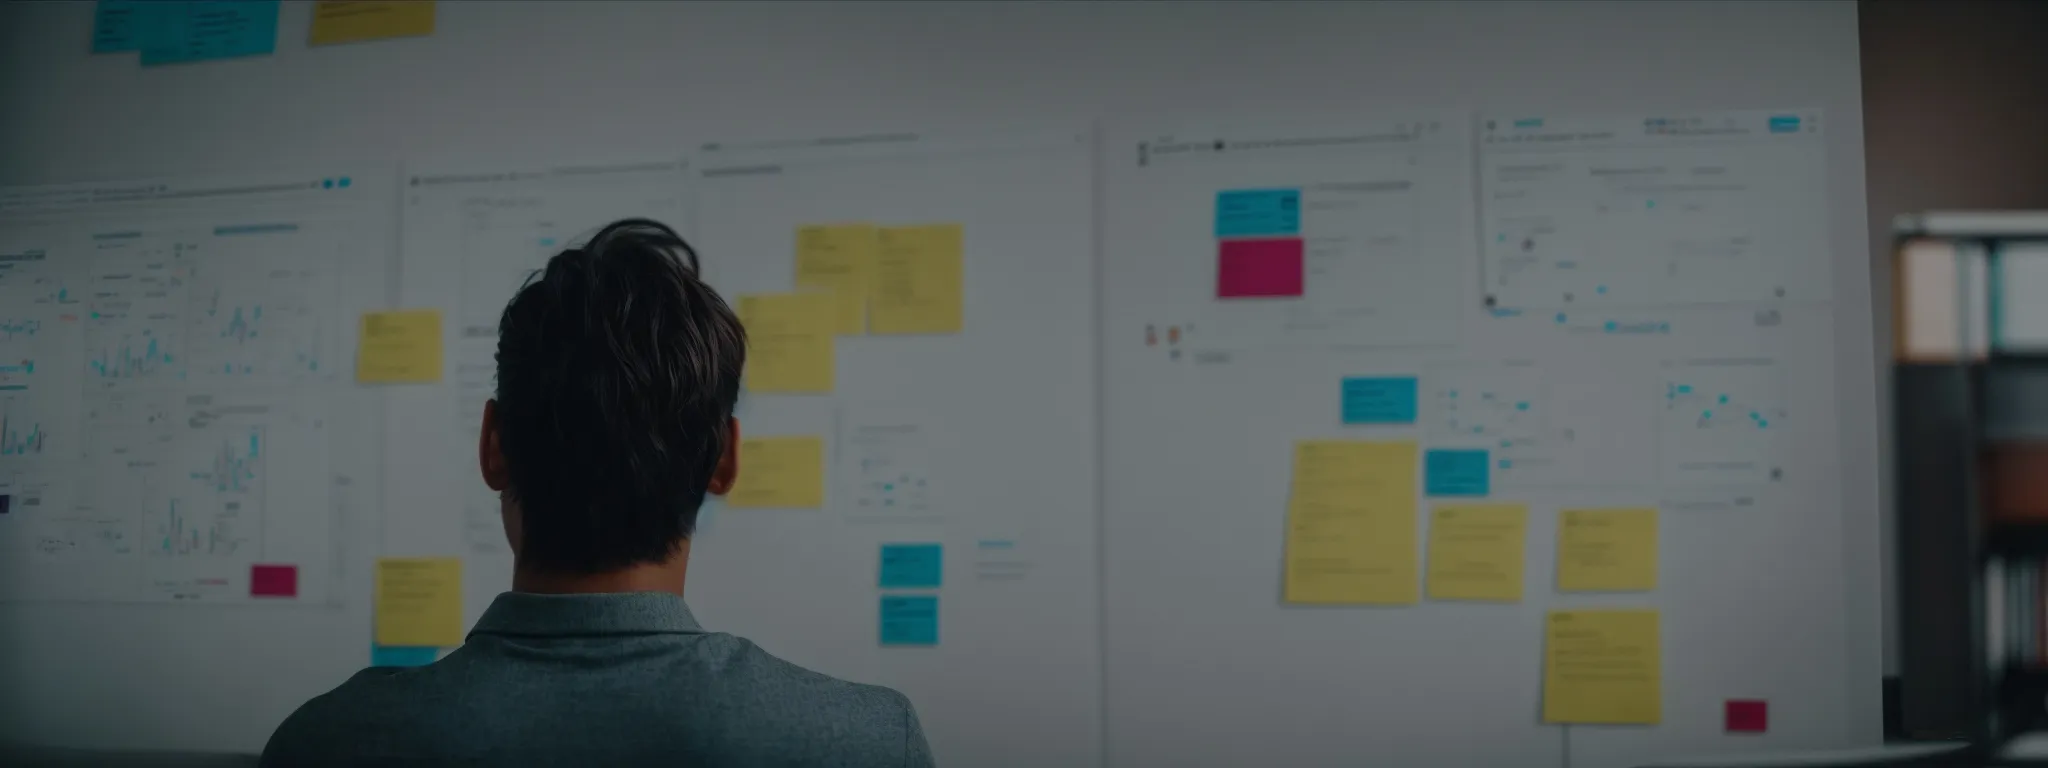 a person sitting at a computer with analytics on the screen, immersed in strategizing next to a whiteboard filled with seo-related notes.